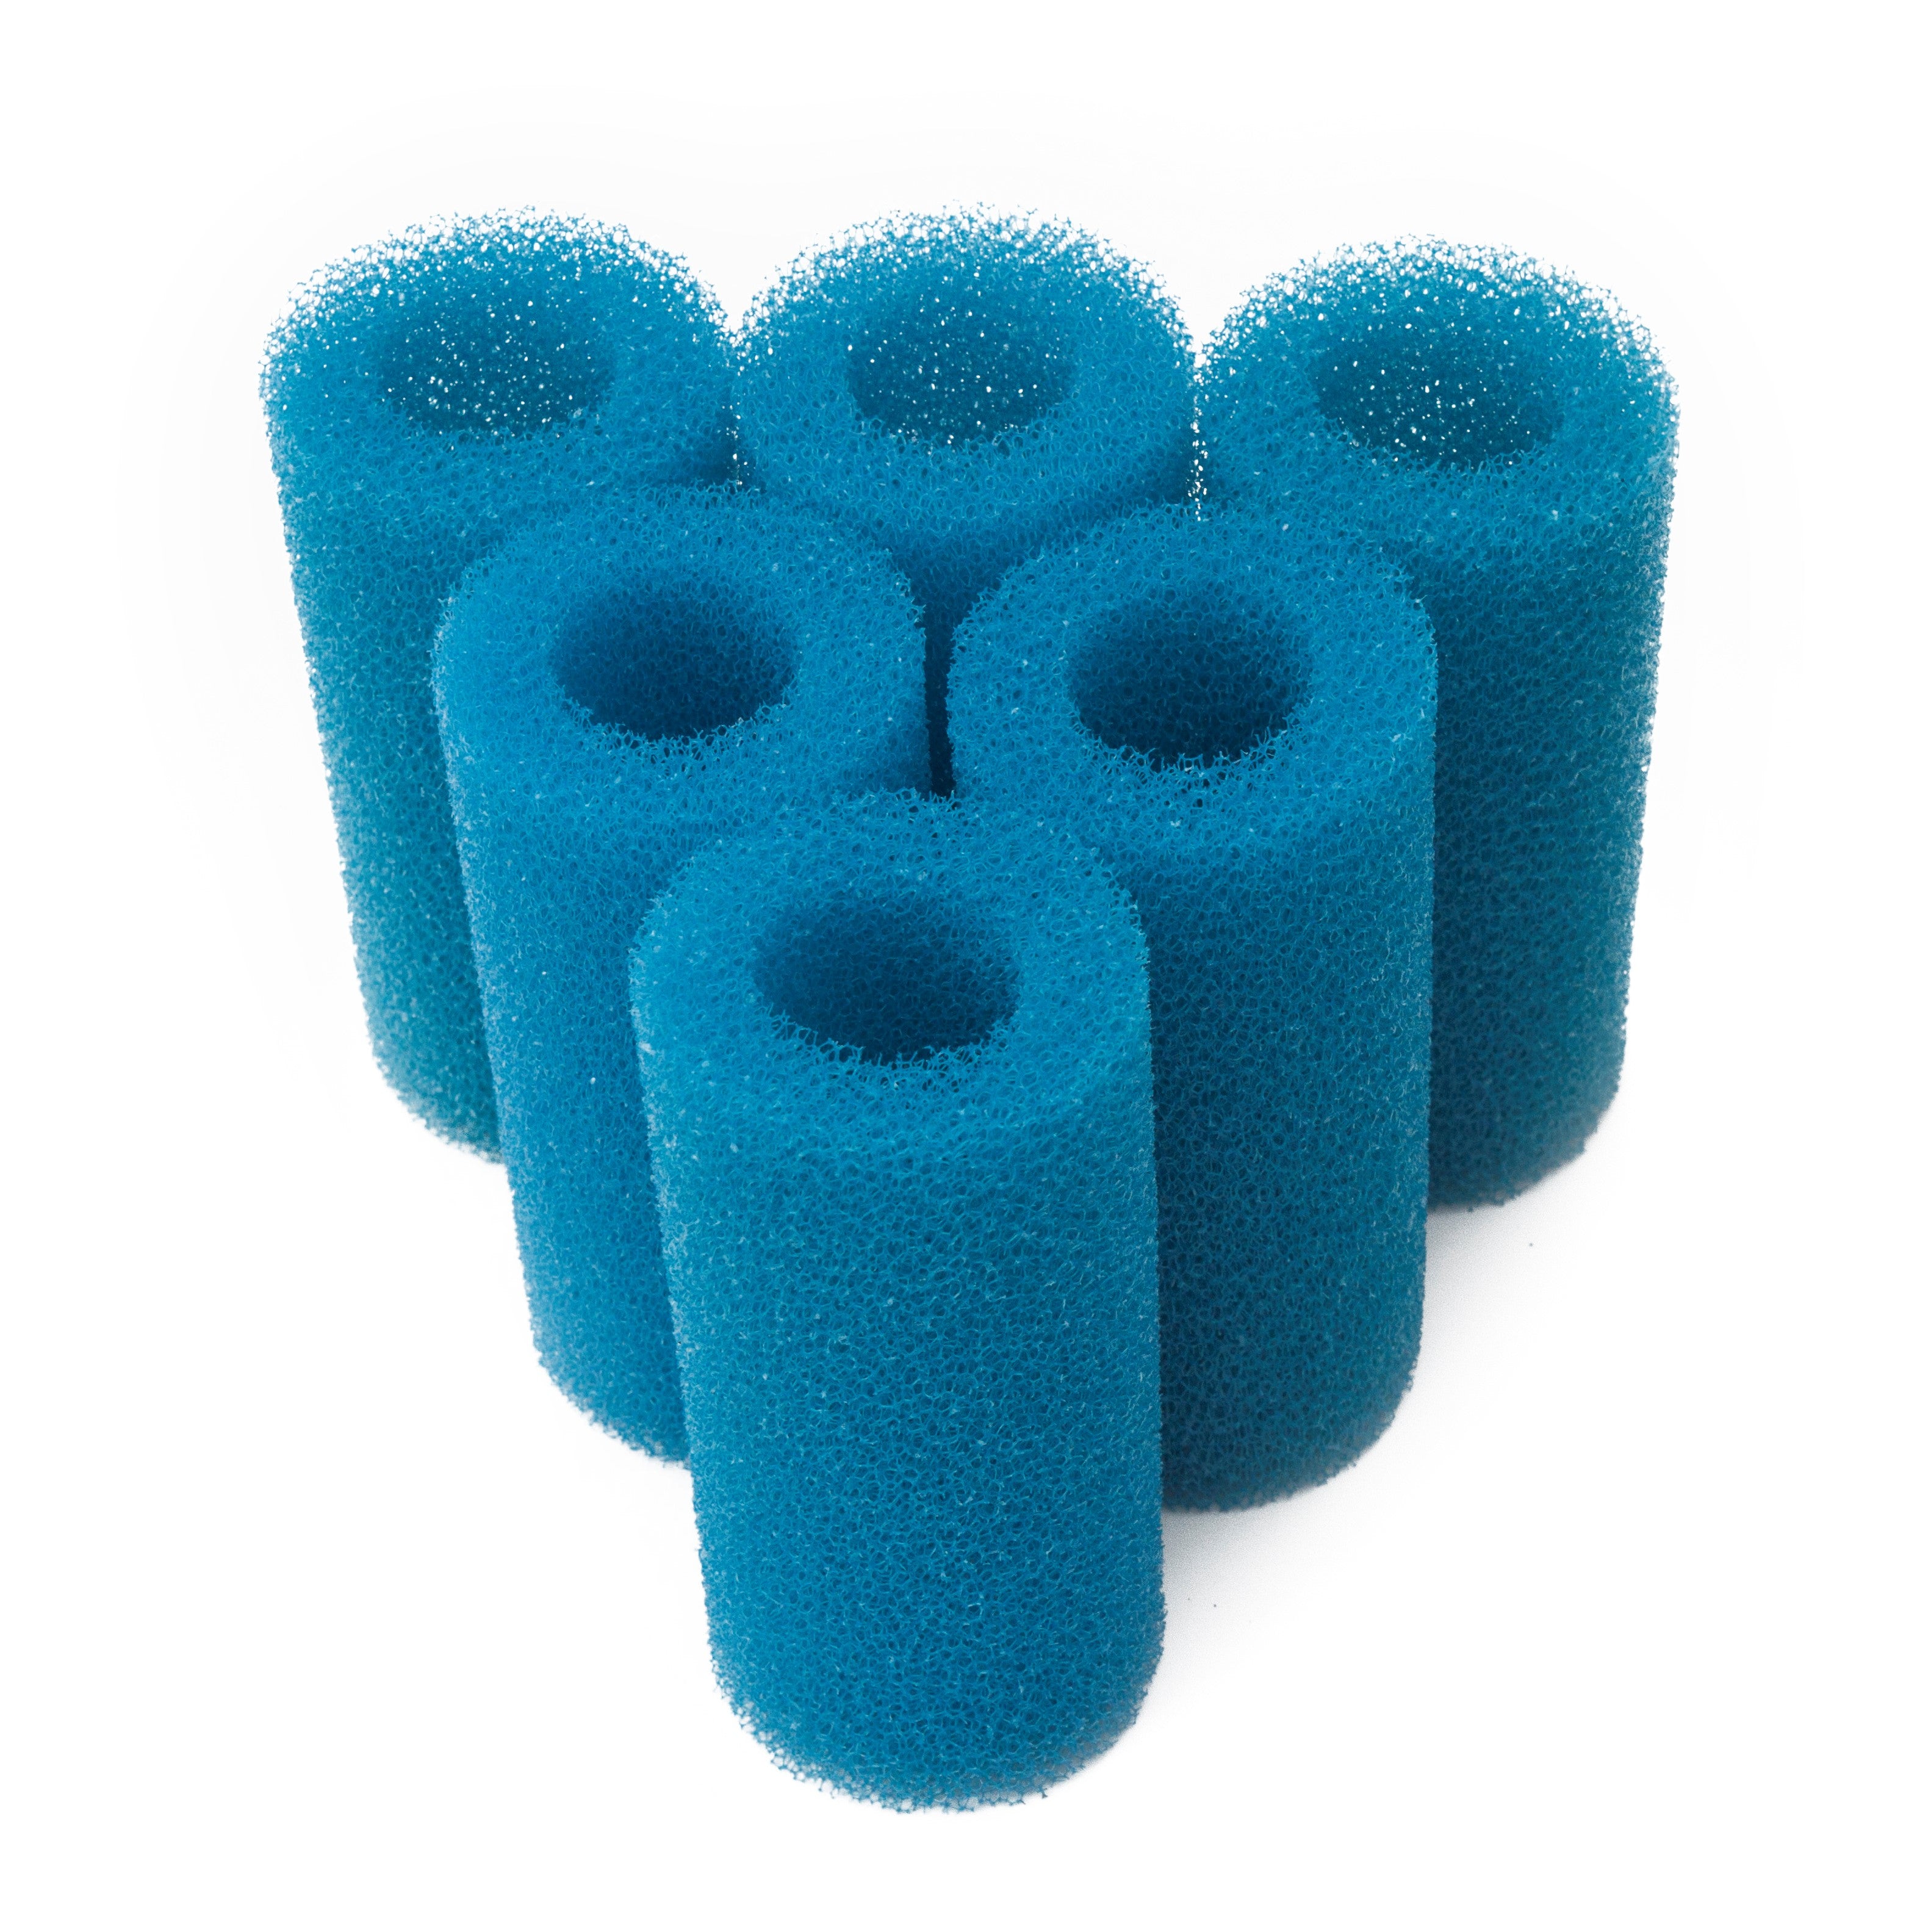 LTWHOME Pre-Filter Sponge Roll Fit for South Ocean Five AOF10112 Aquarium Filter, 2.75 by 5.9-Inch (Pack of 6)